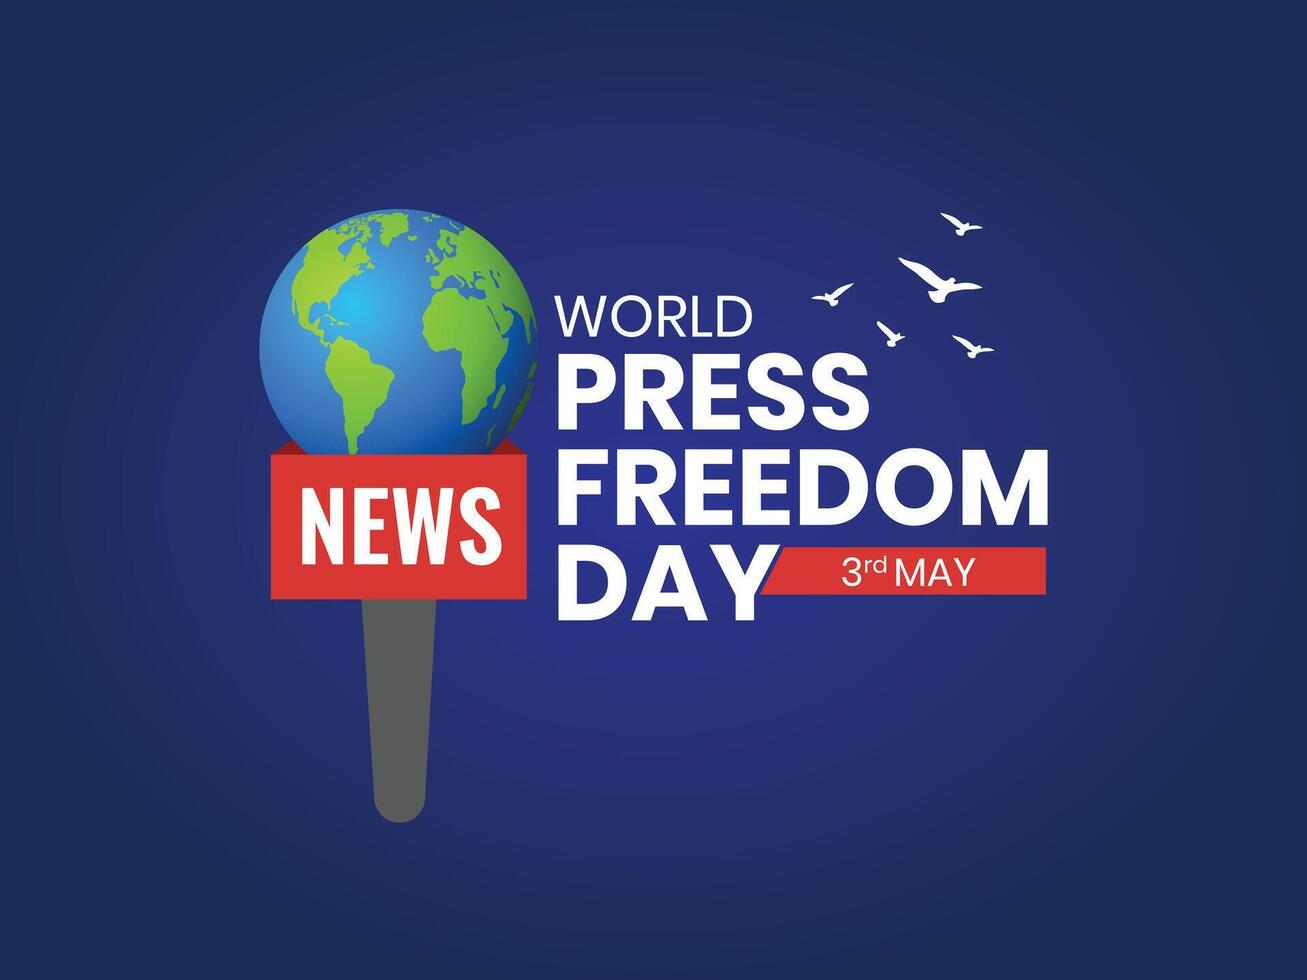 world press freedom day or World Press Freedom Day or World Press Day to raise awareness of the importance of freedom of the press. End Impunity for Crimes against Journalism, Independent of media vector